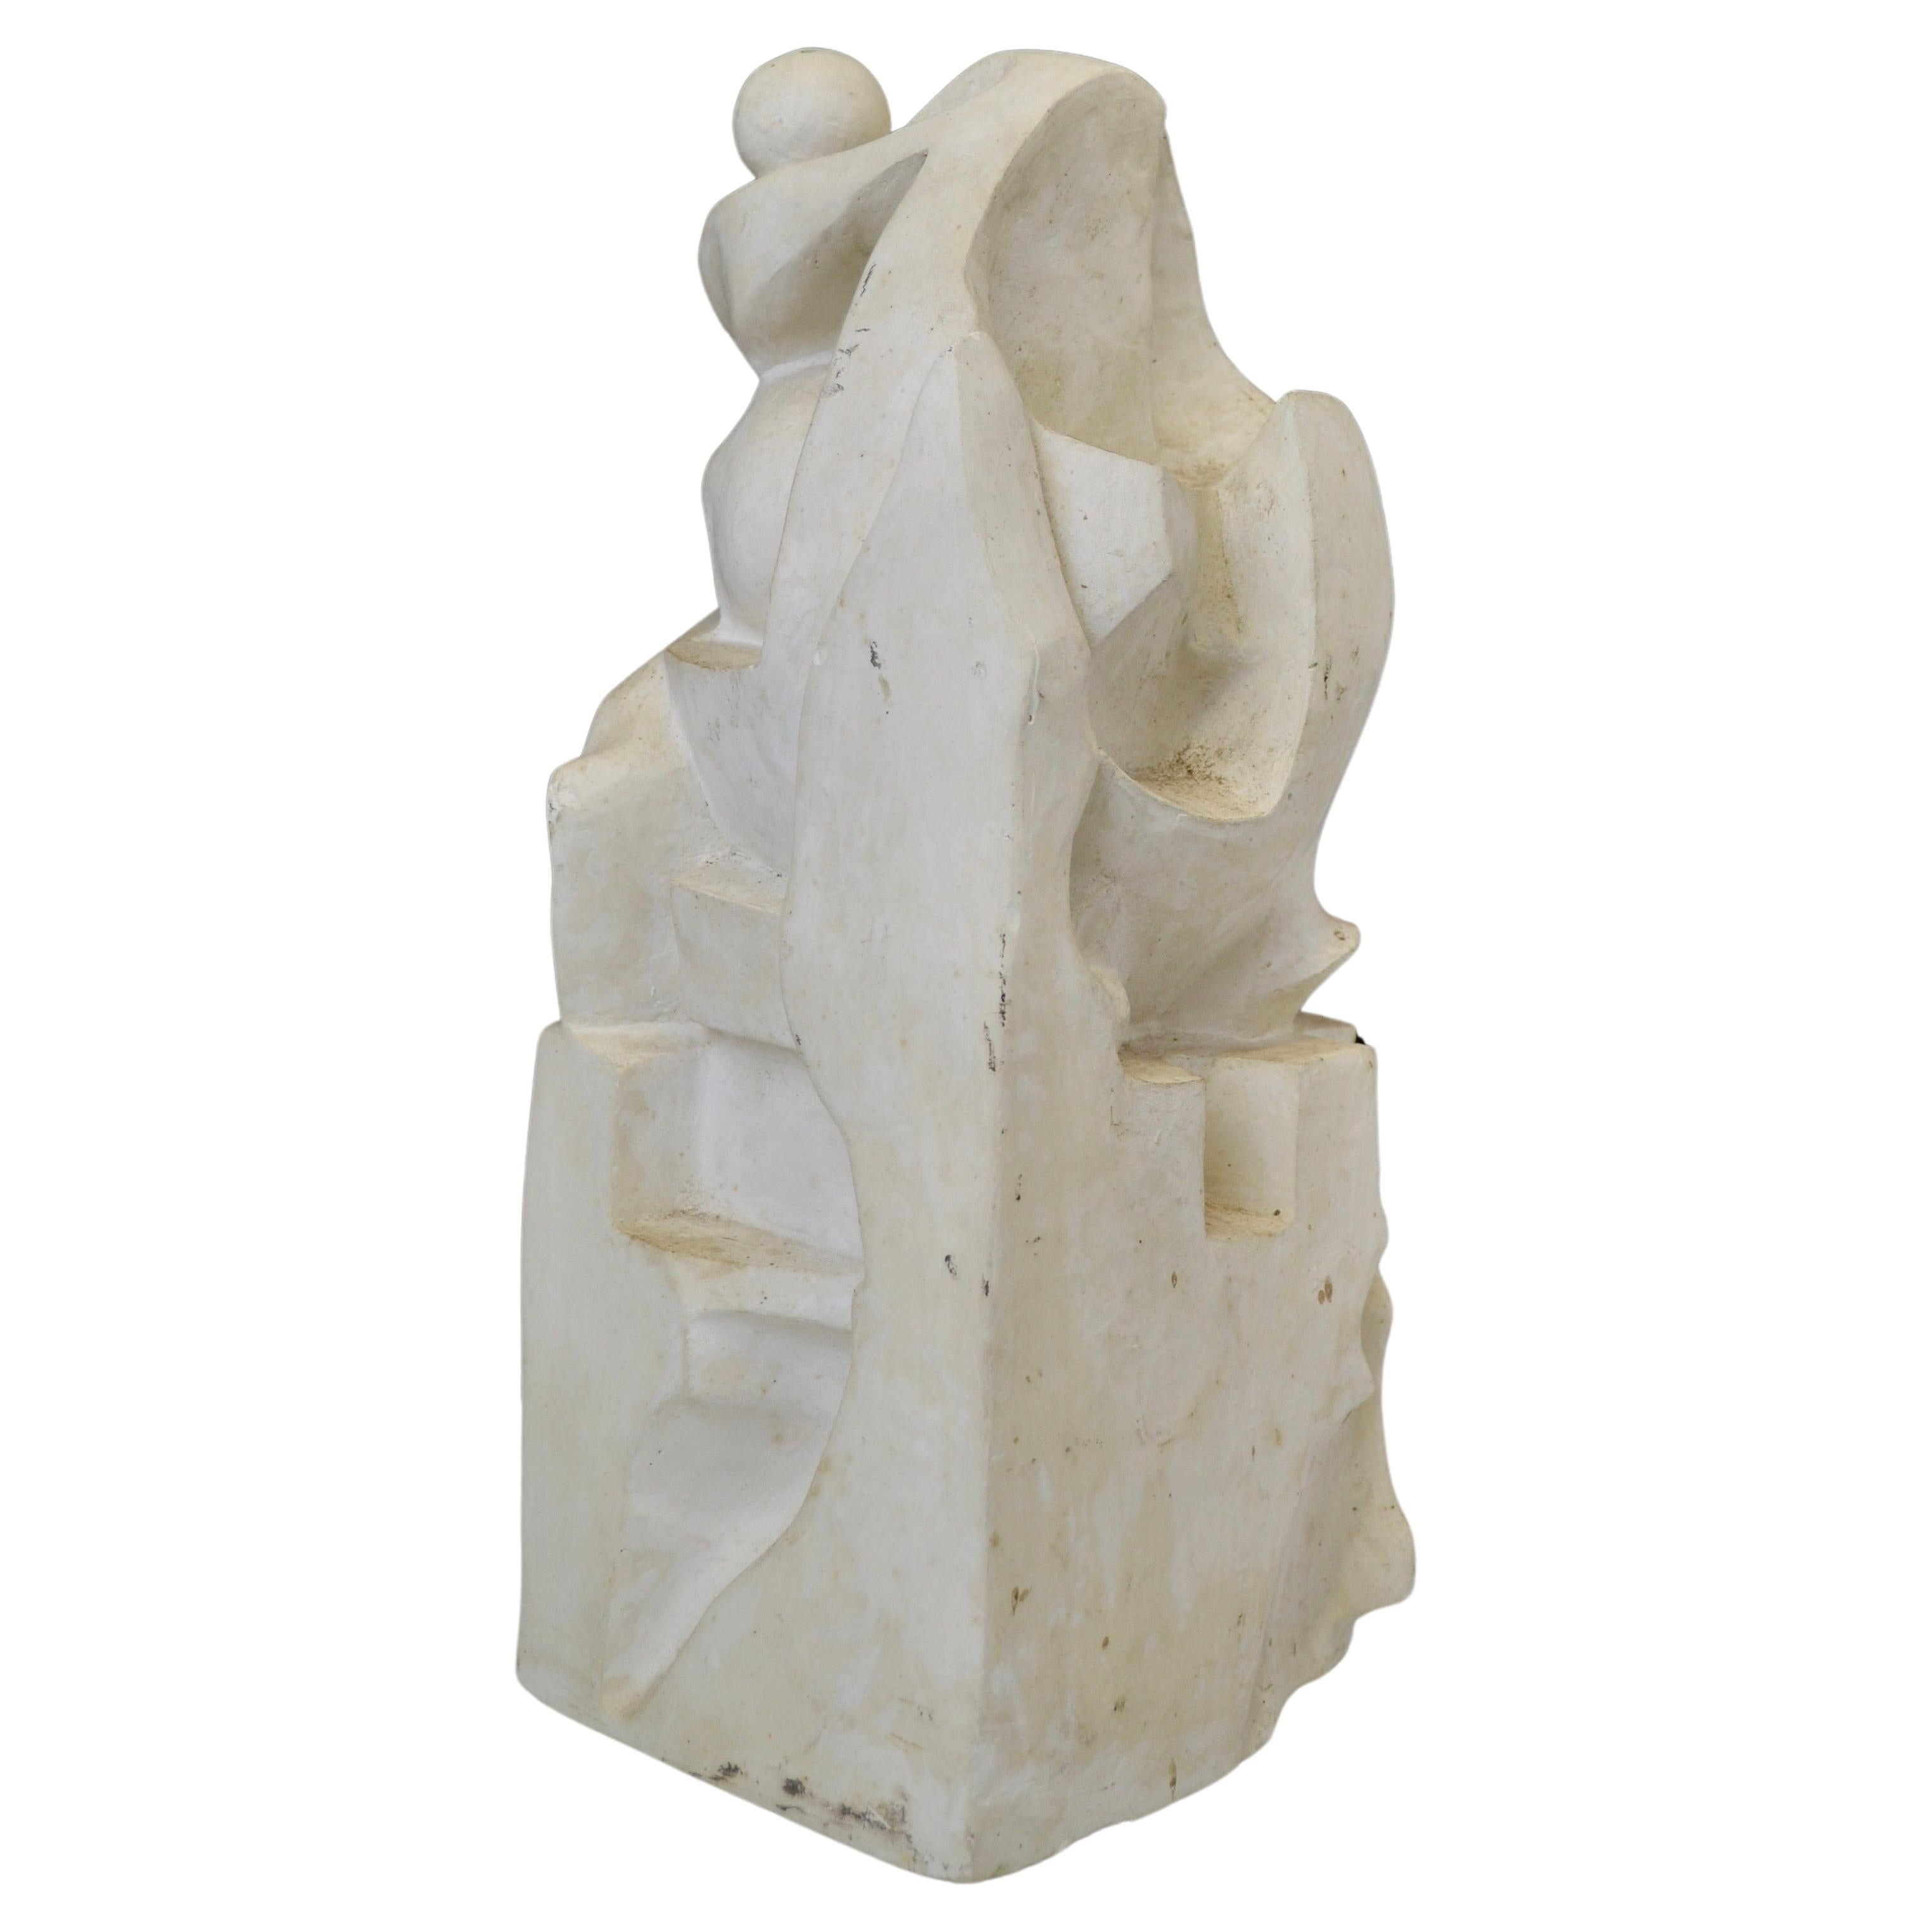 Abstract plaster sculpture from the 1950s with a French origin.